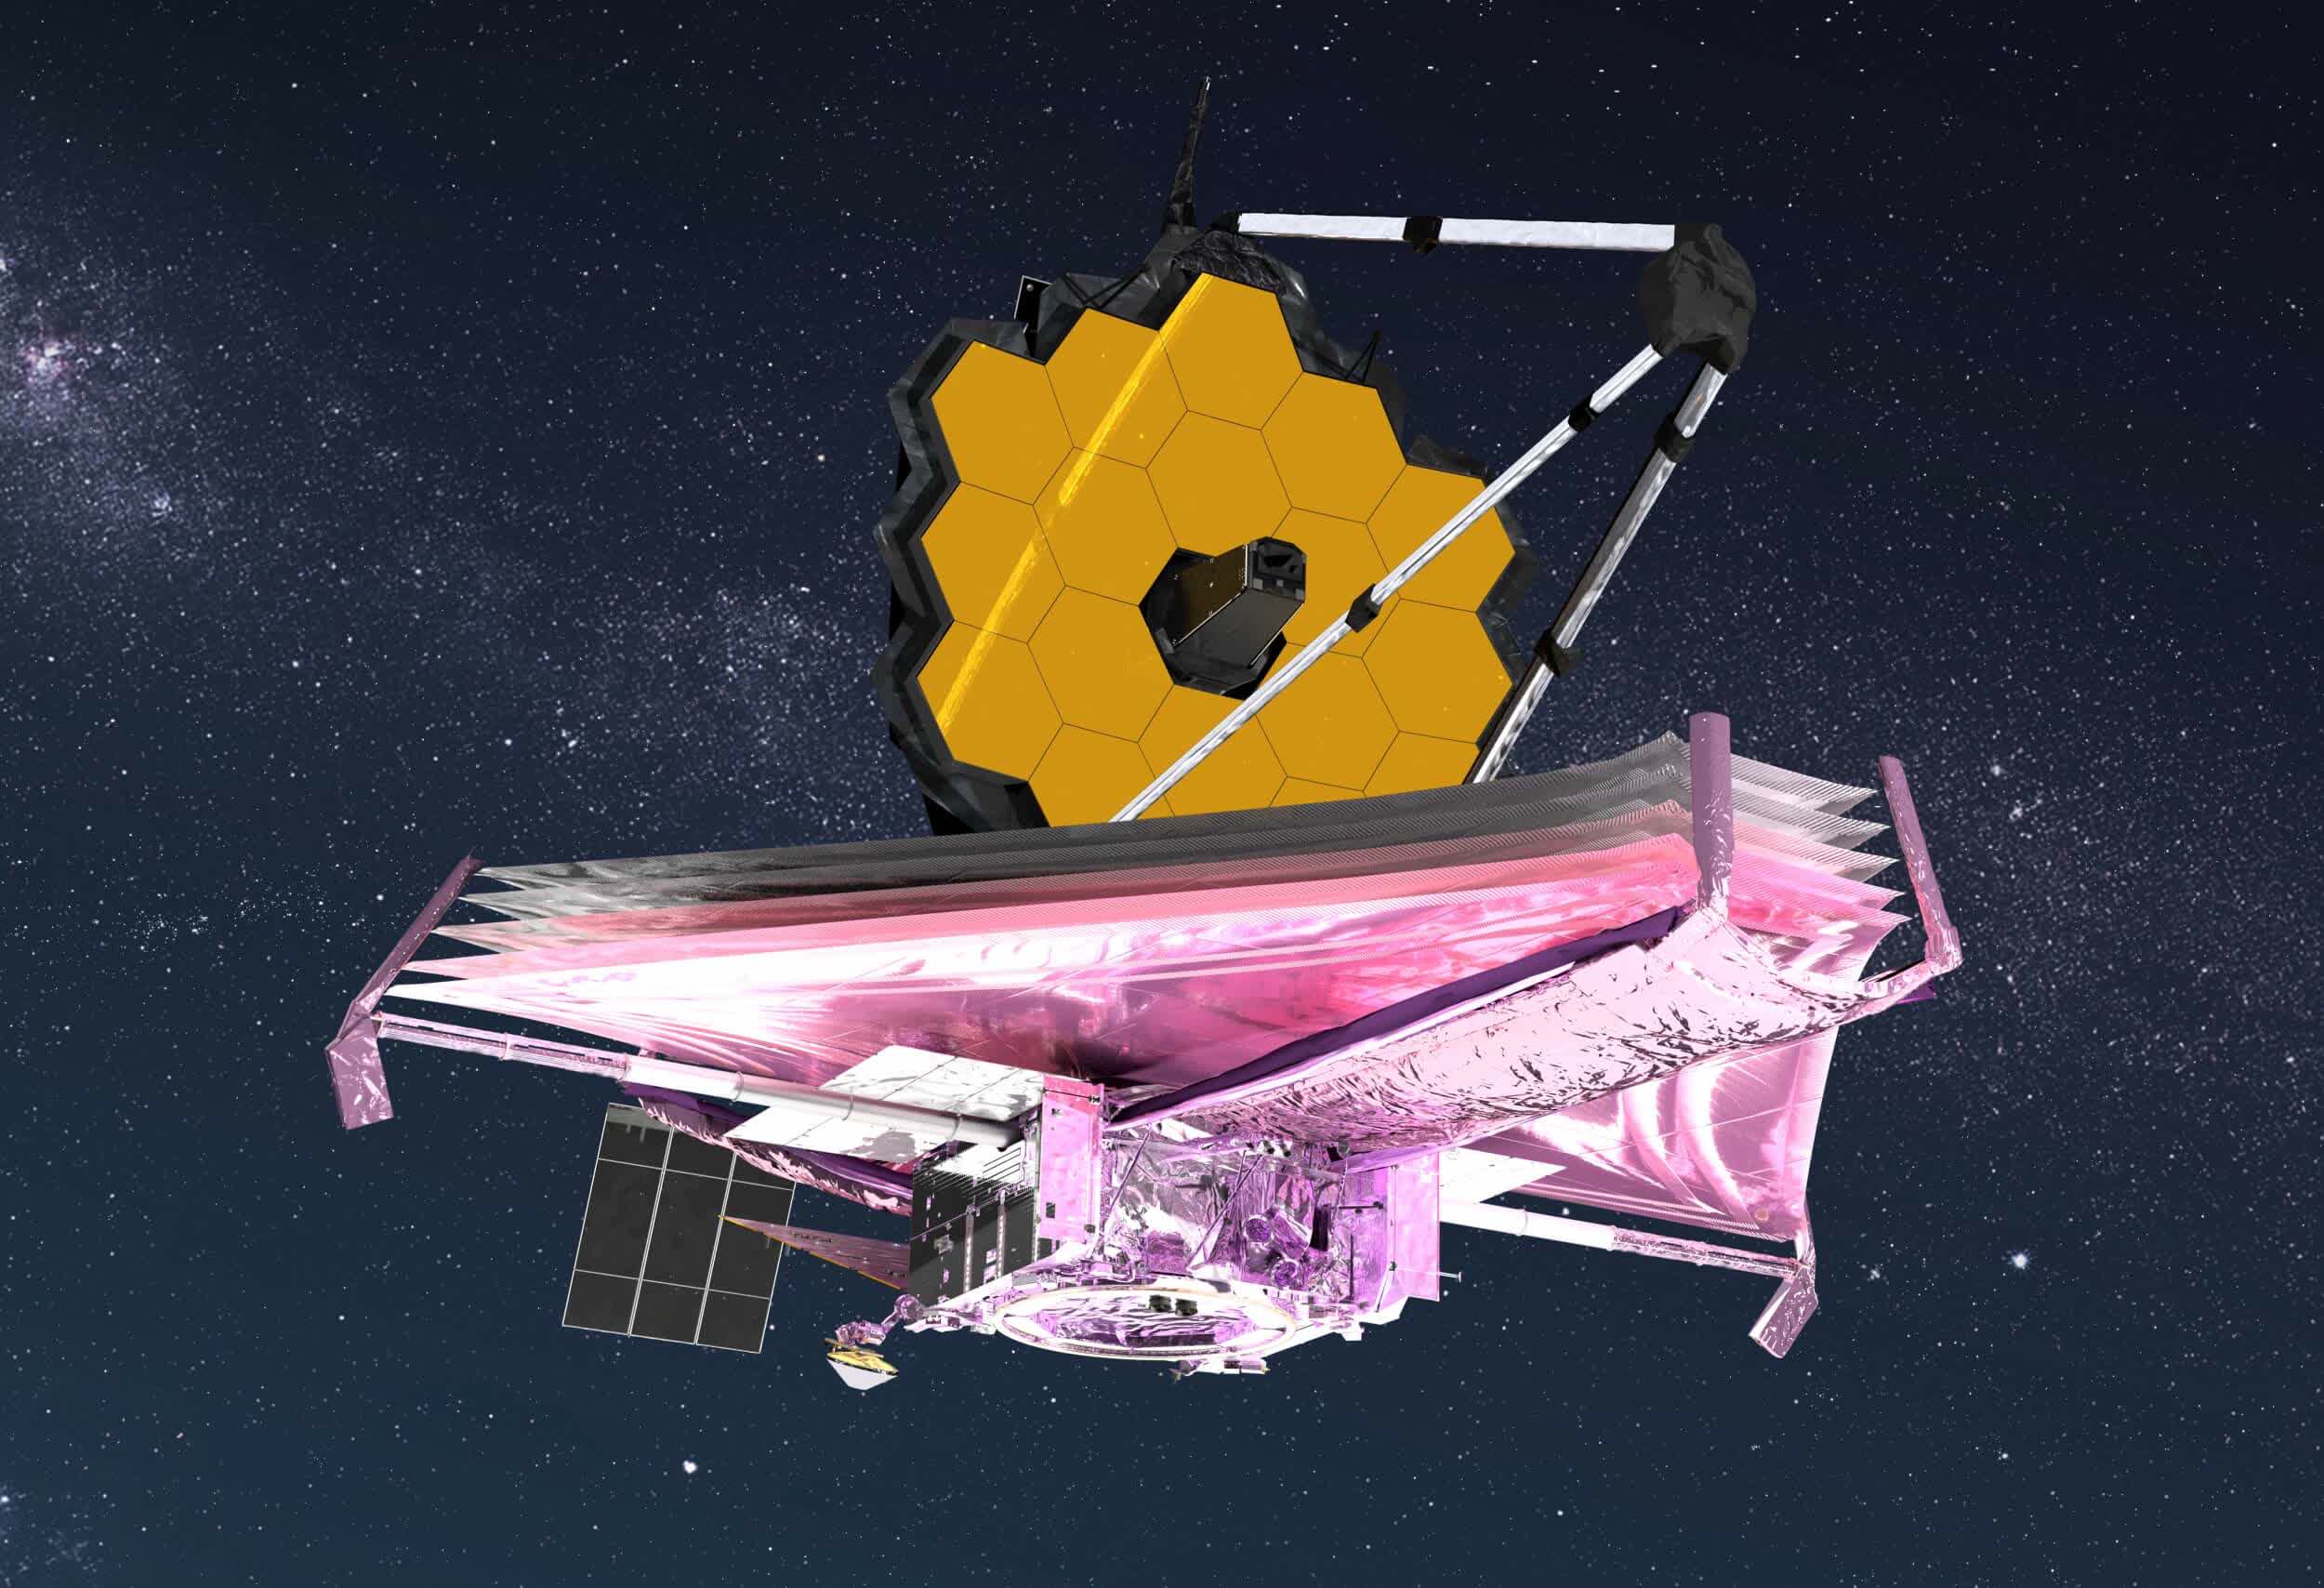 NASA didn't equip the James Webb Space Telescope with cameras. Here's why.